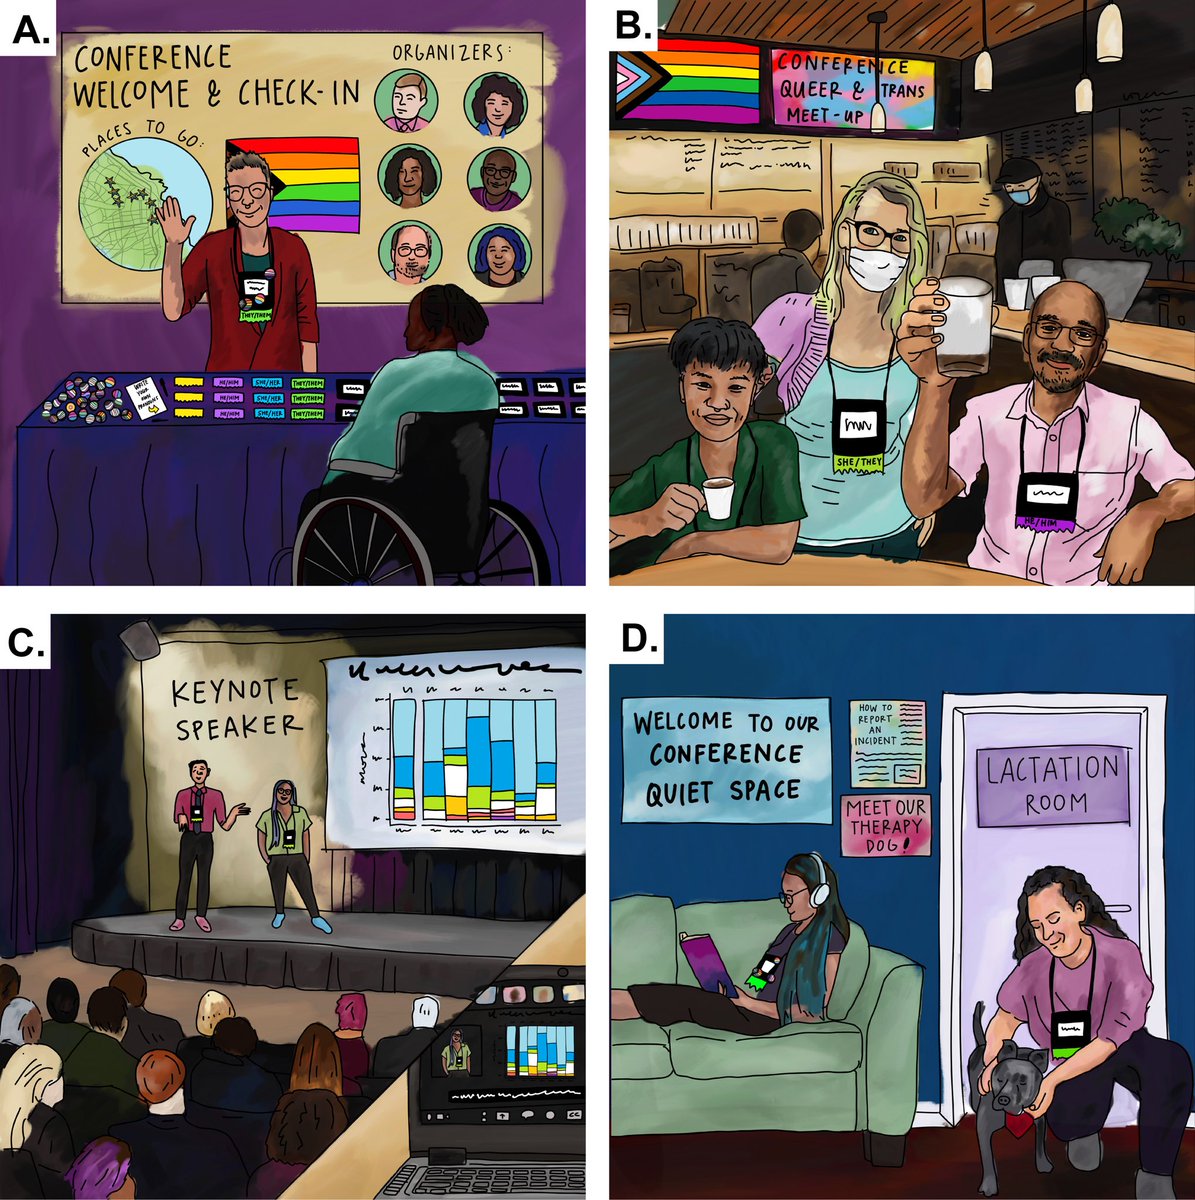 Super honored to have illustrated a figure for our new paper, “Building a queer- and trans-inclusive microbiology conference.” 🏳️‍⚧️🏳️‍🌈 Does anybody recognize who’s in the illustrations? 👀 Check it out!! 👇🏼